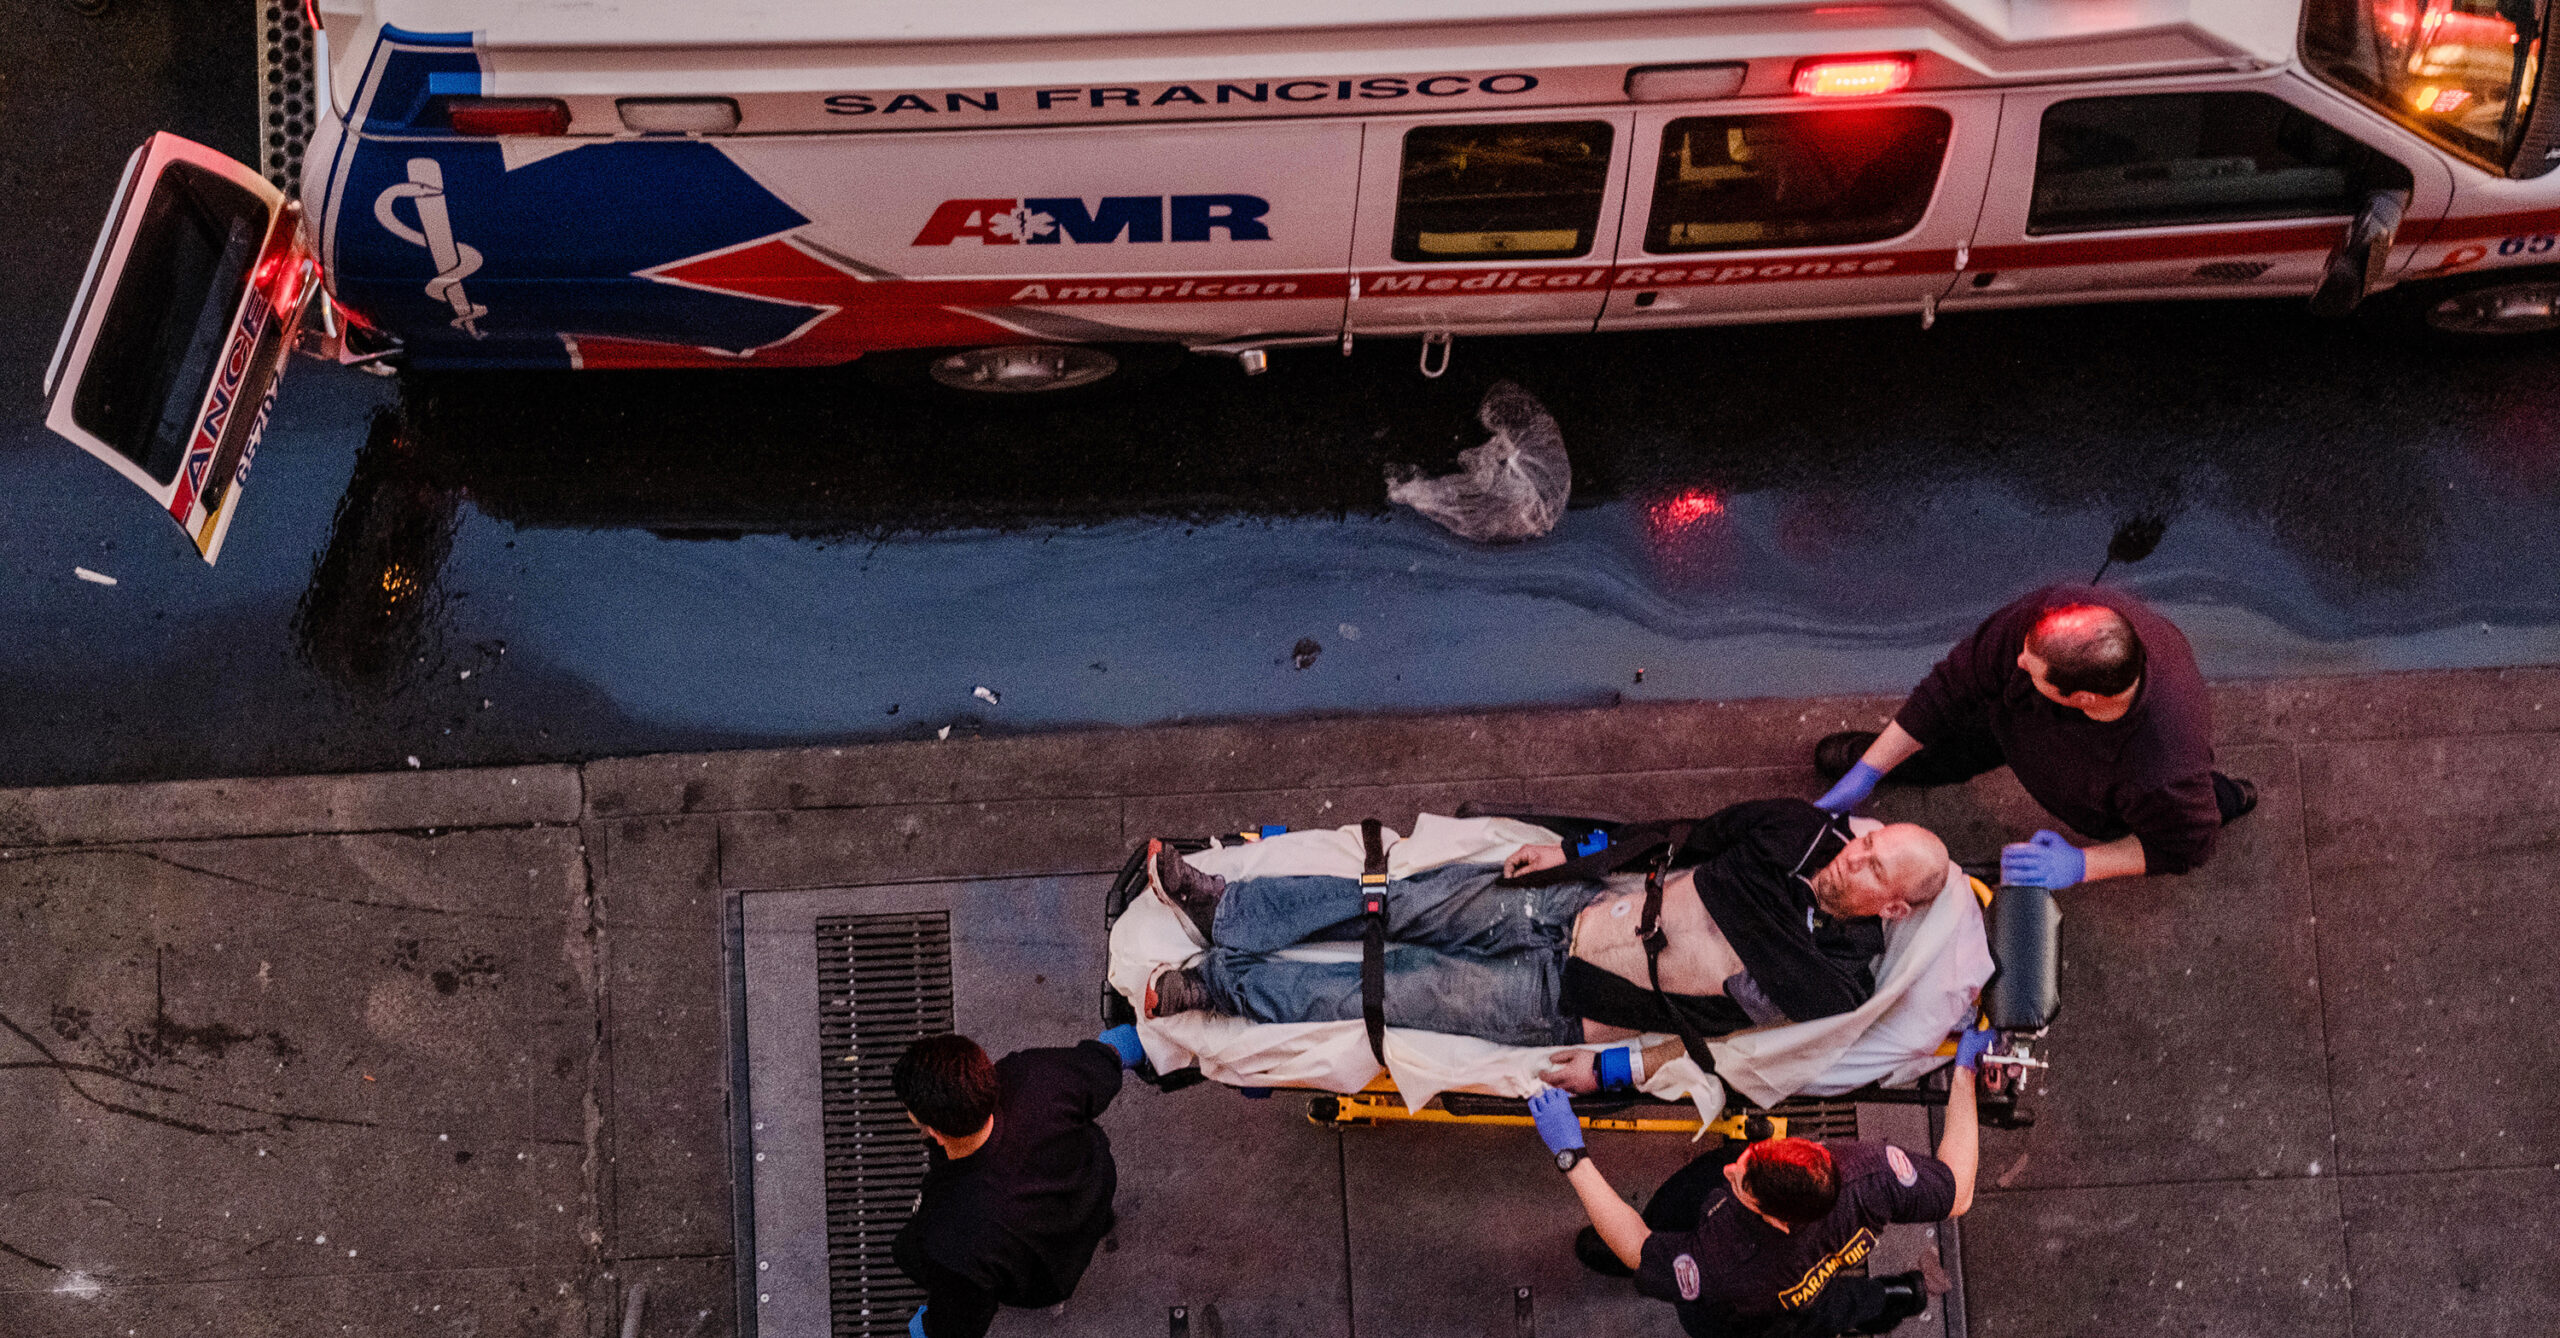 Paramedics attend to a person on a stretcher beside an ambulance on a city street at dusk.